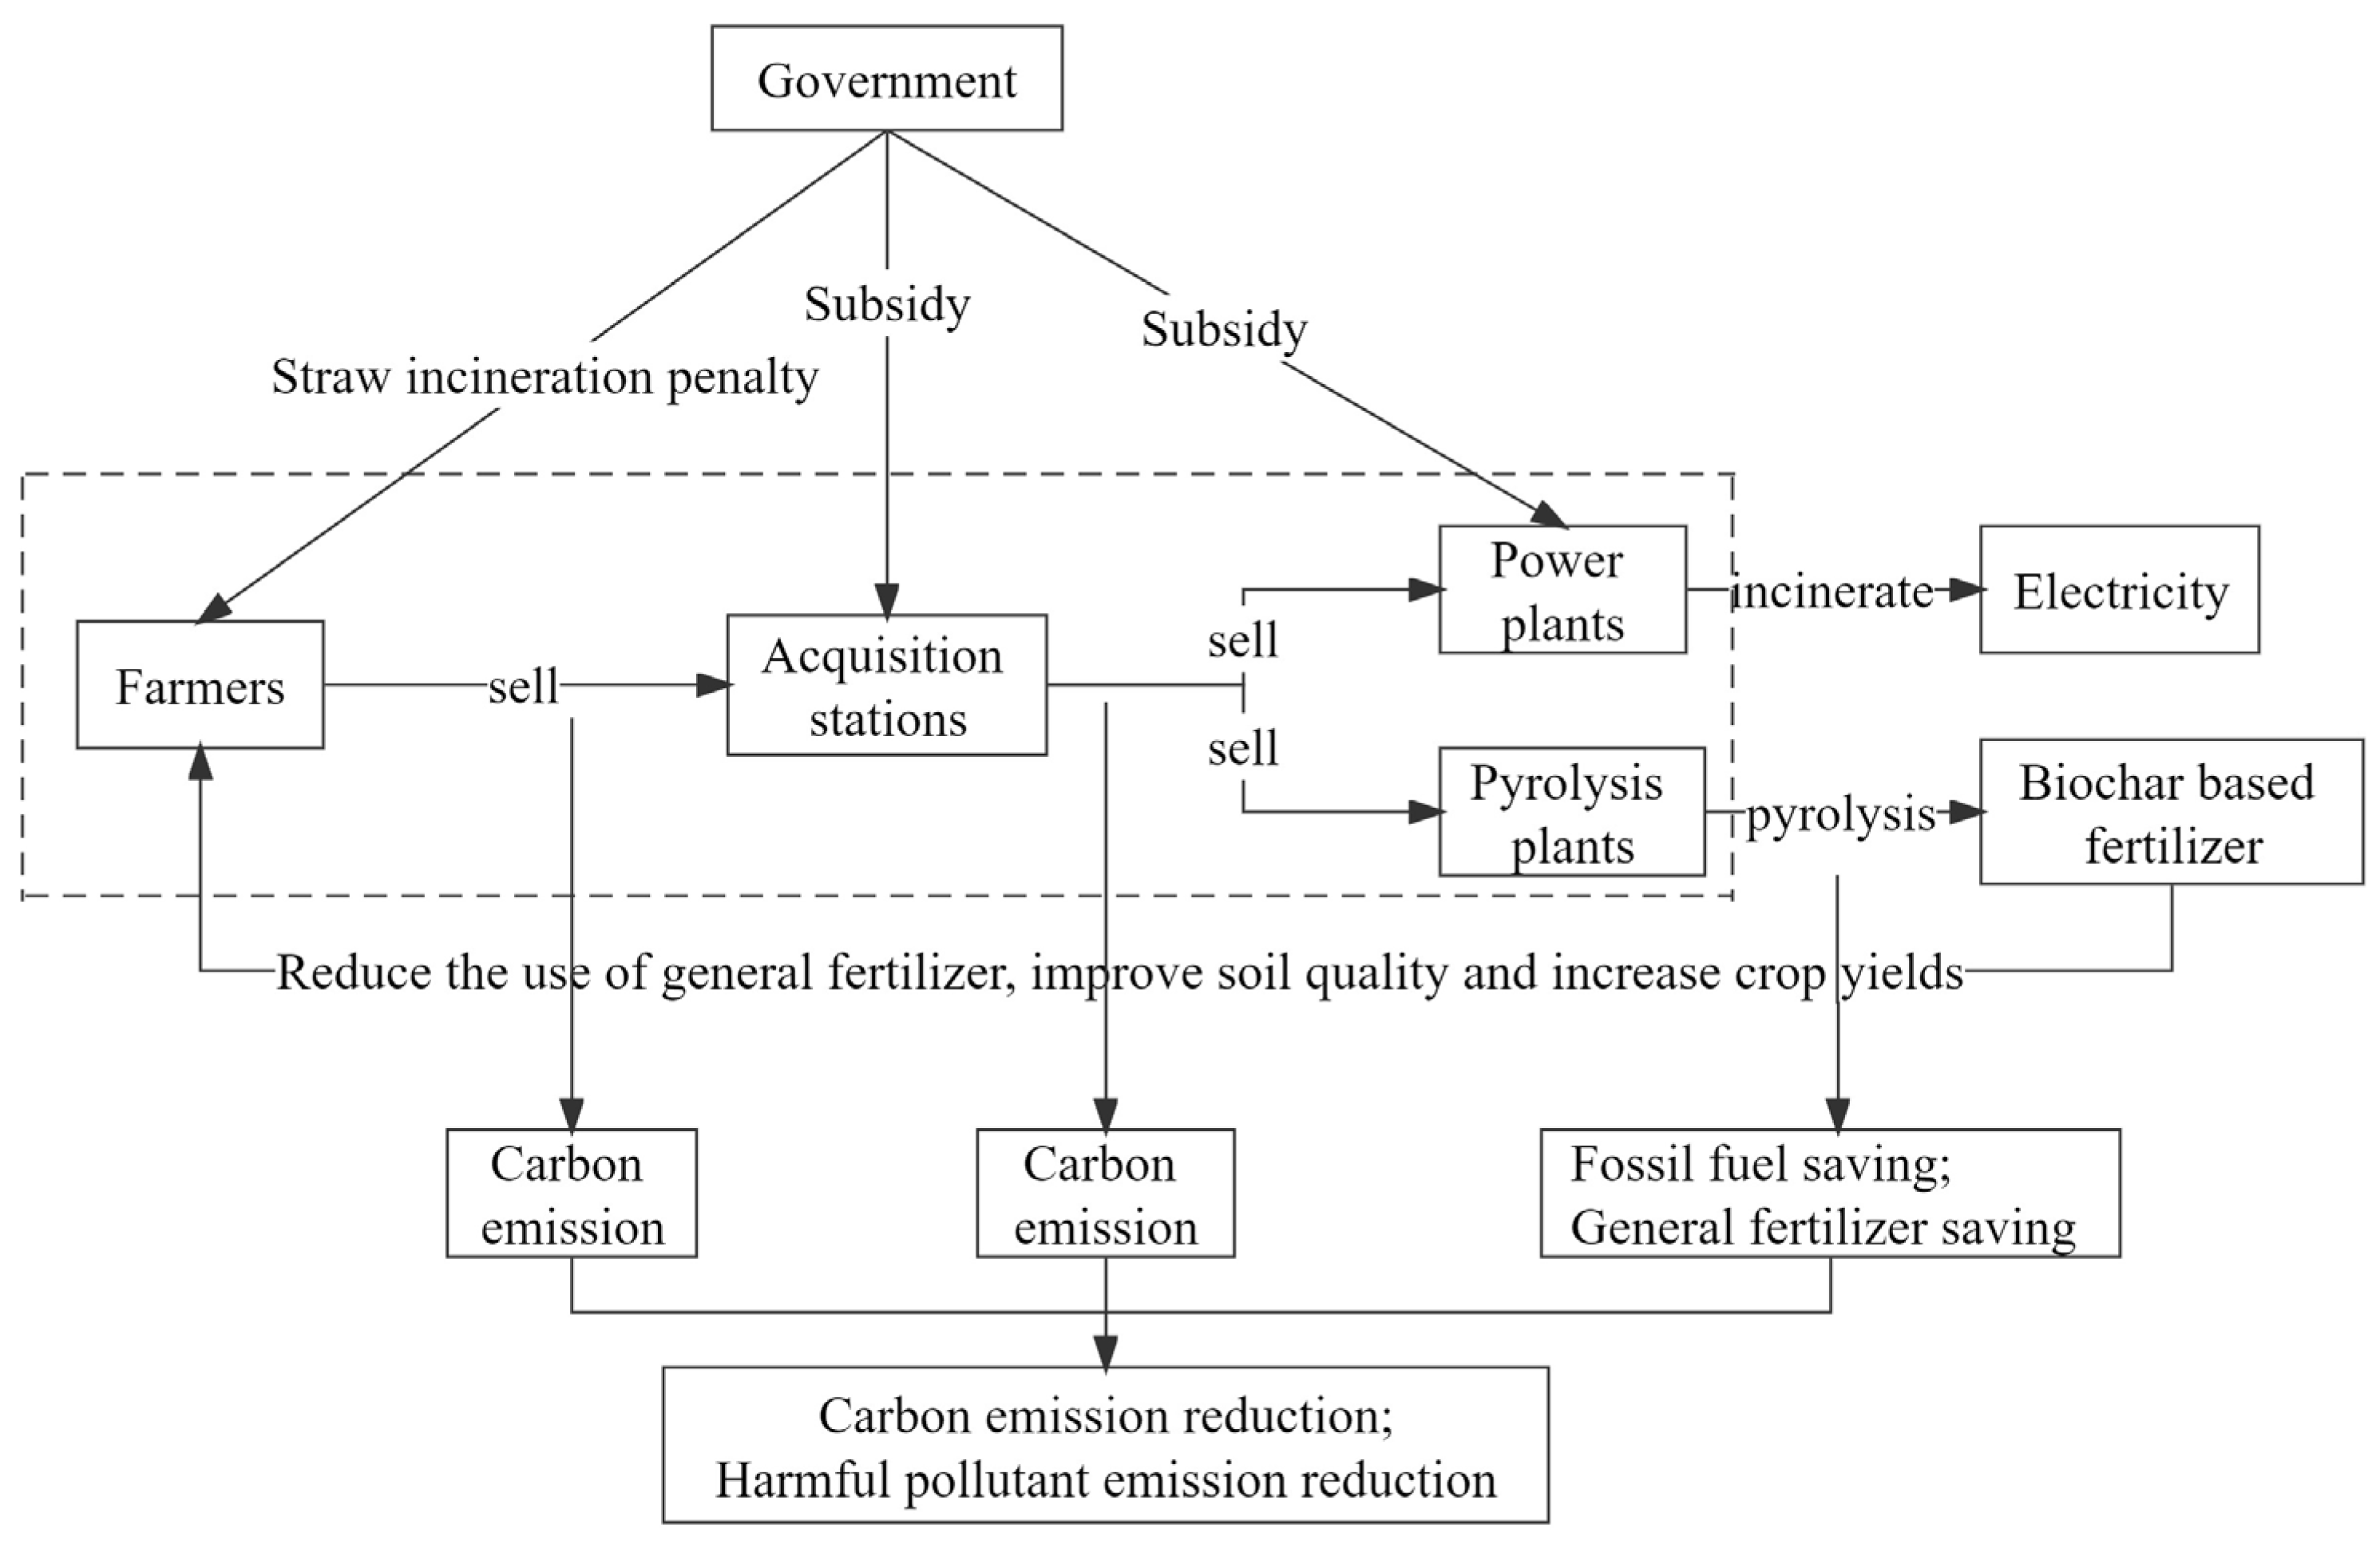 Systems | Free Full-Text | Policy Analysis of Biomass Recycling Supply ...